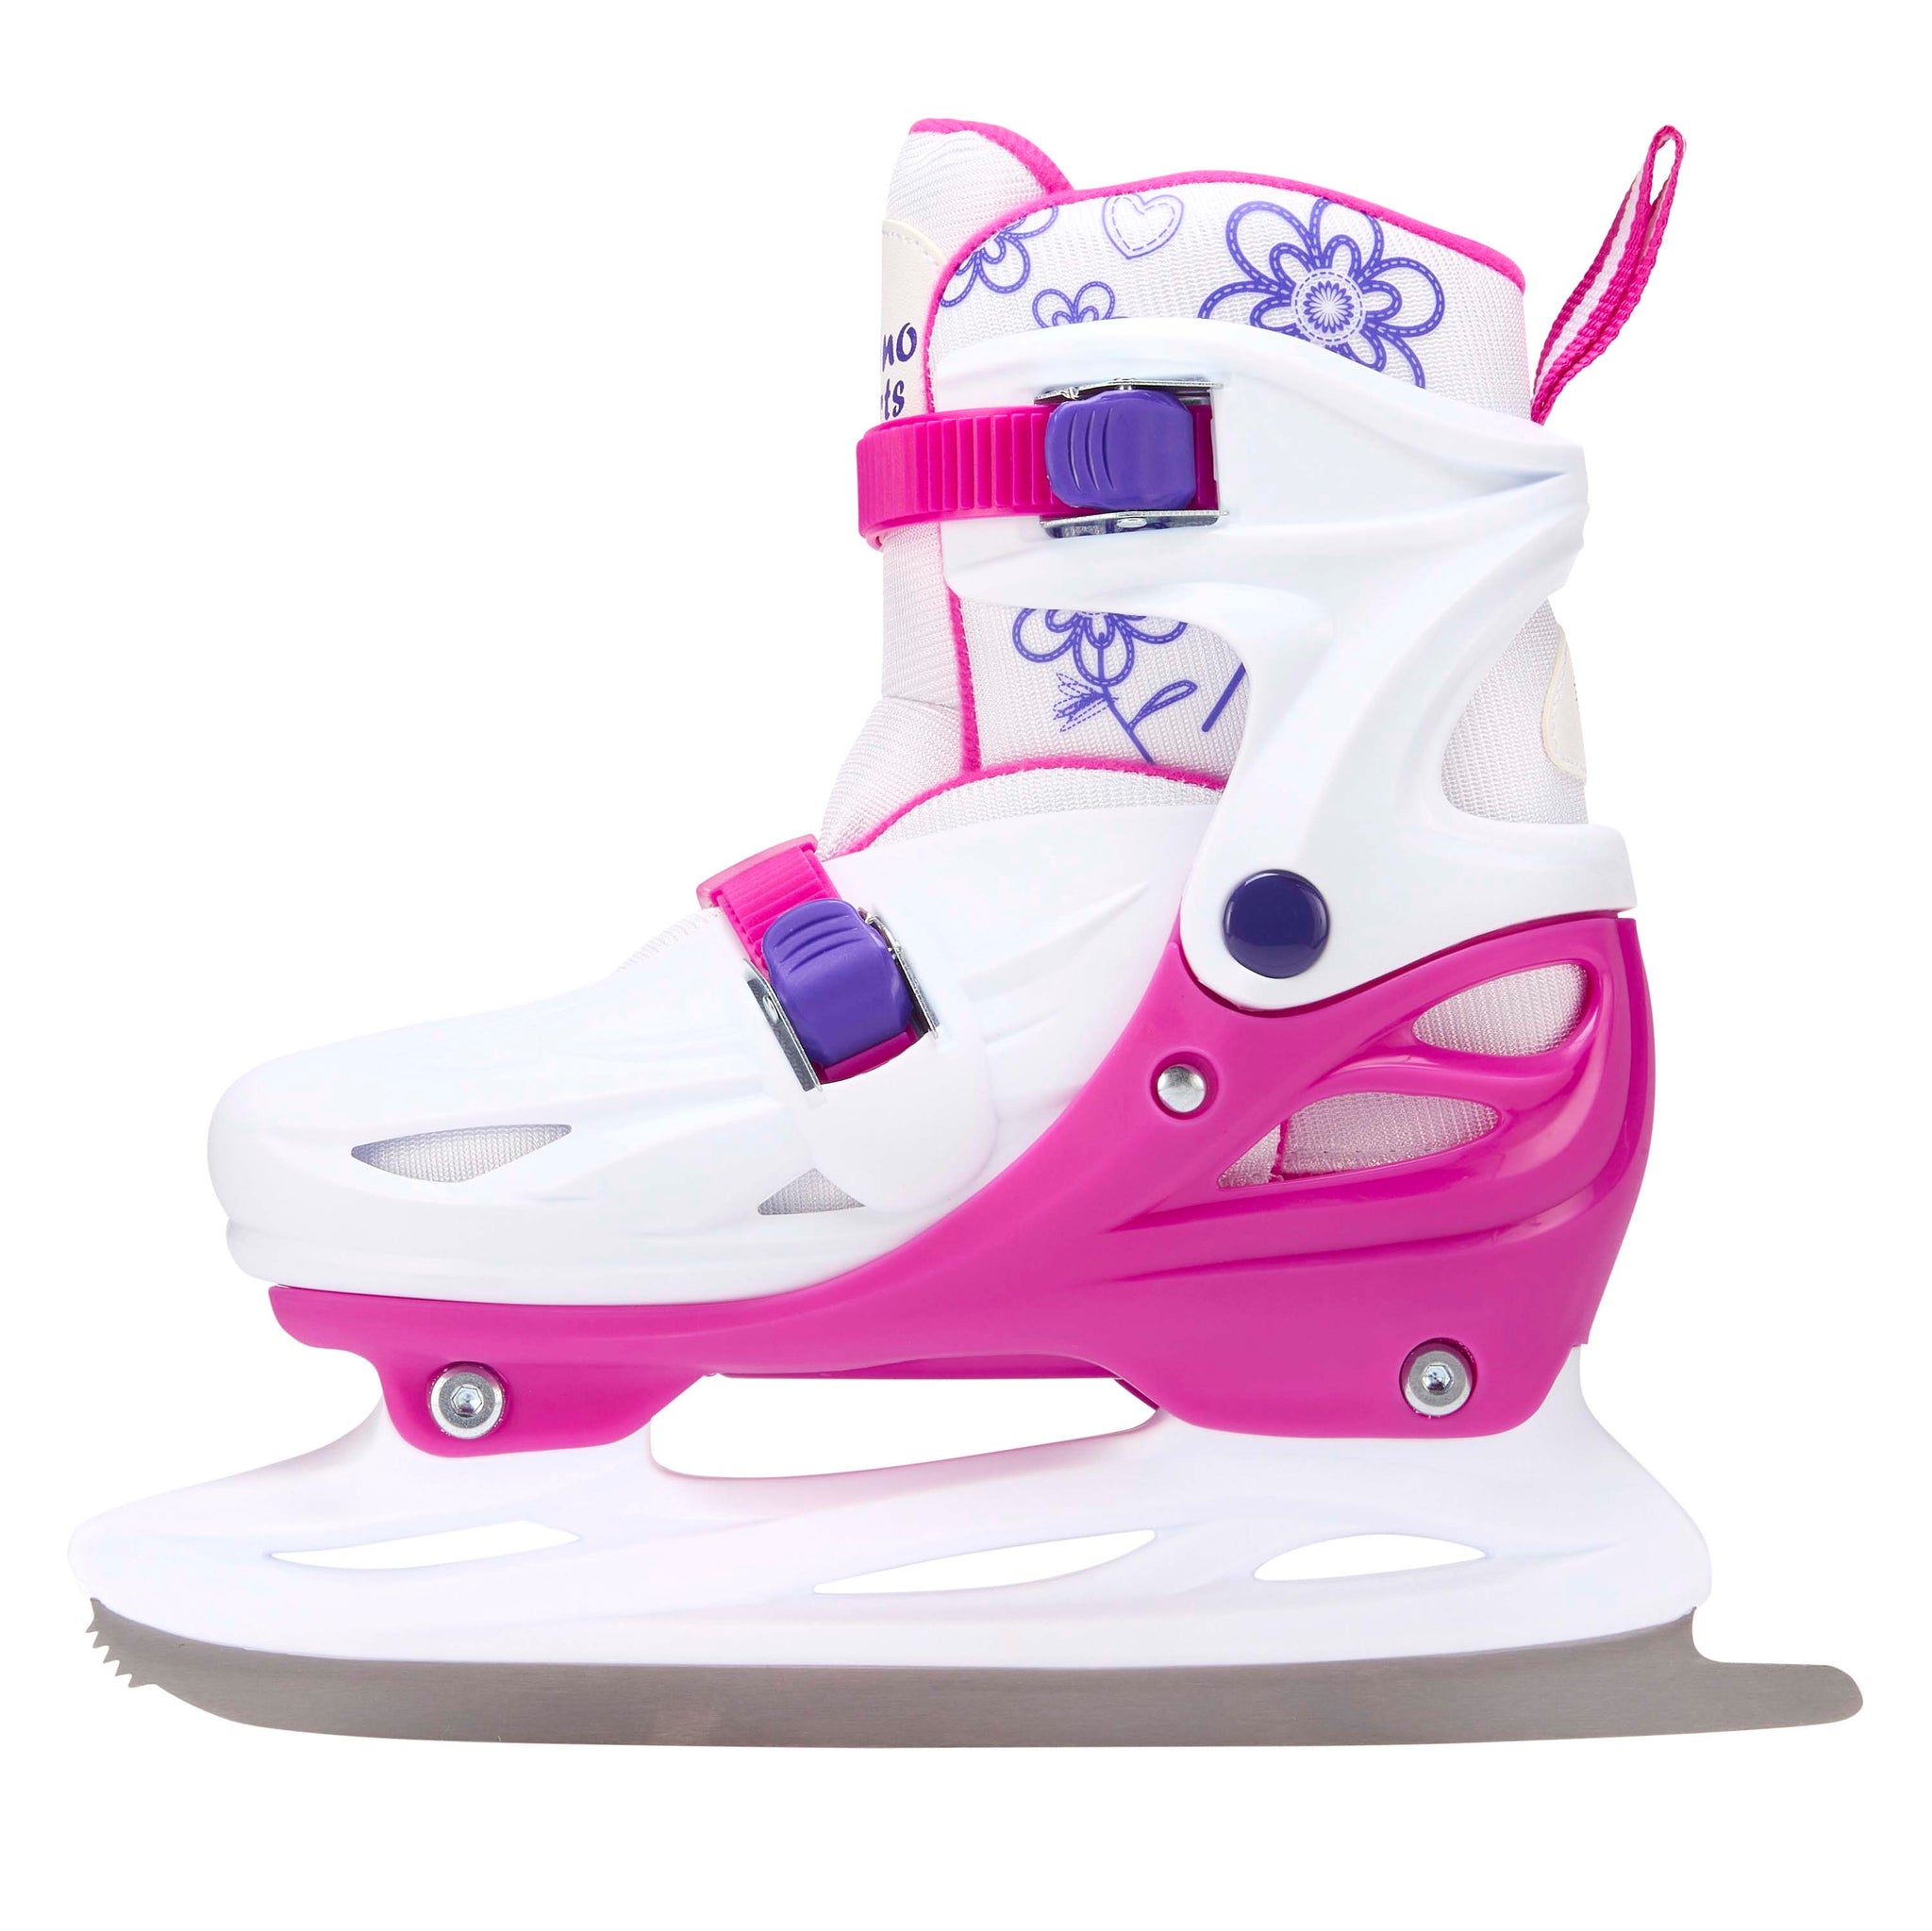 Best Comfortable Ice Skates for Beginners | Xino Sports